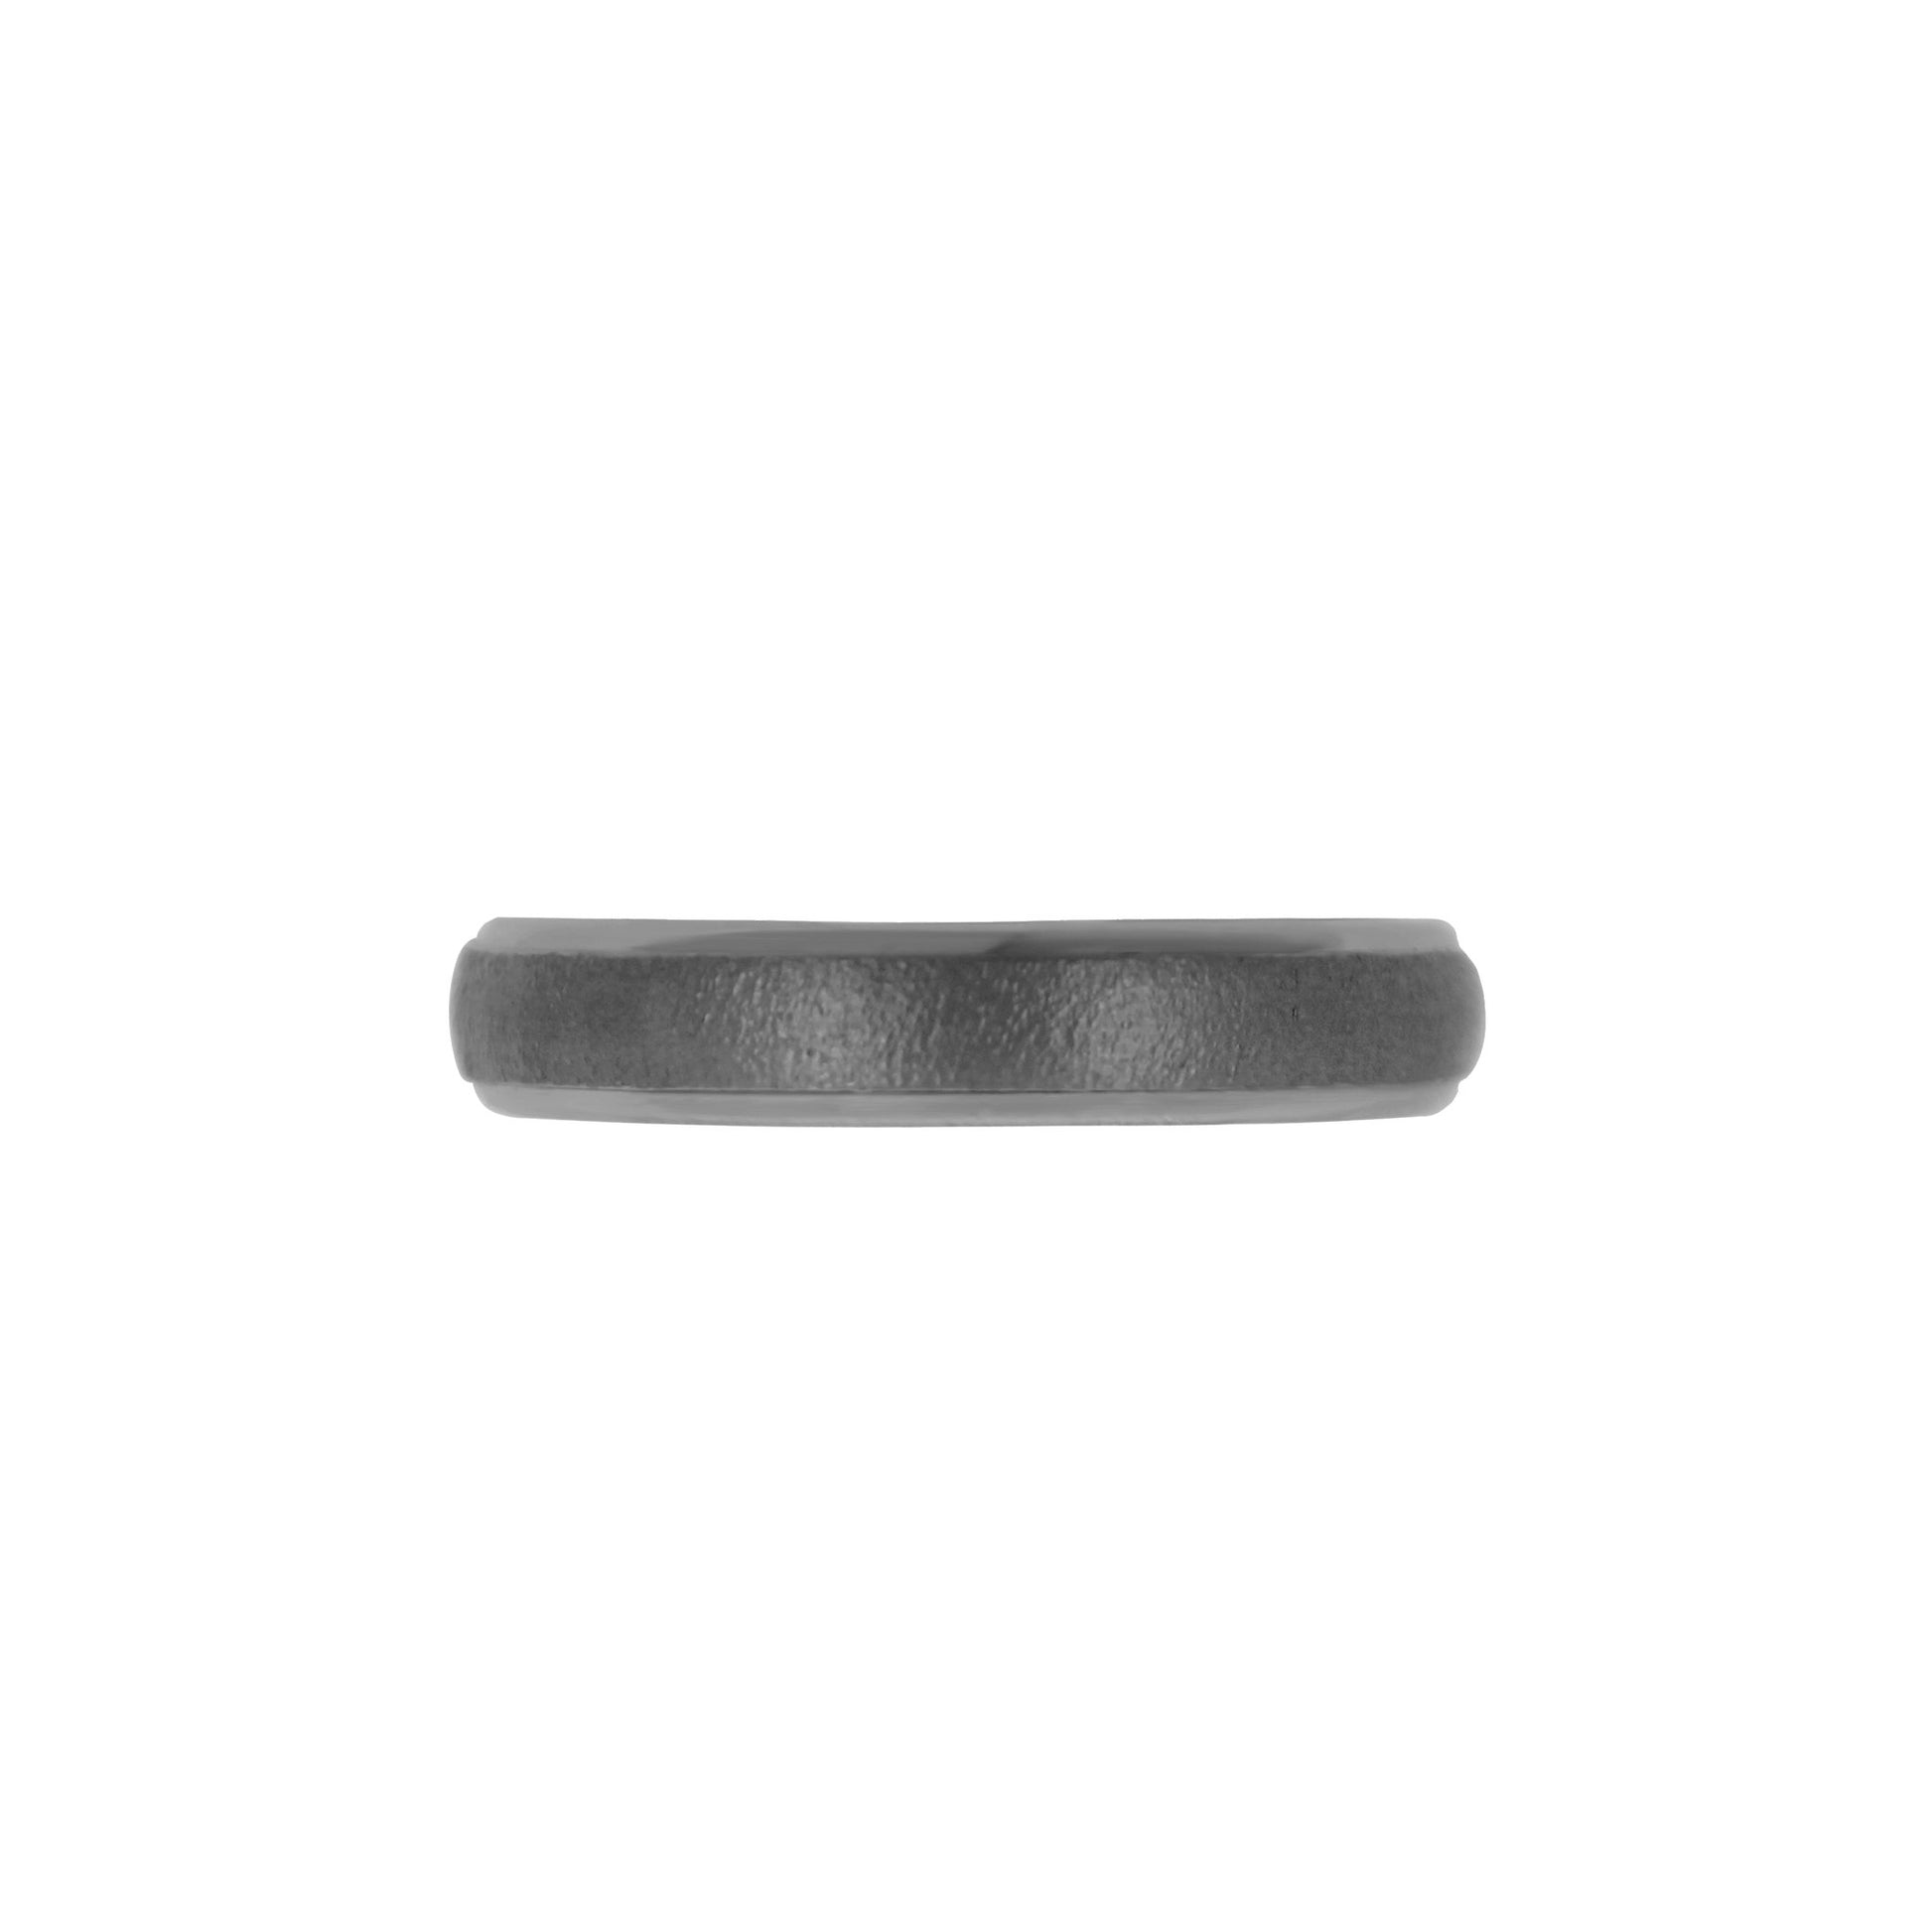 Titan Ring w/ Tantalum Fine Hammered Mat/Polished.  Ring profile: width: 5.0 mm || height: 2.7 mm. Top view.